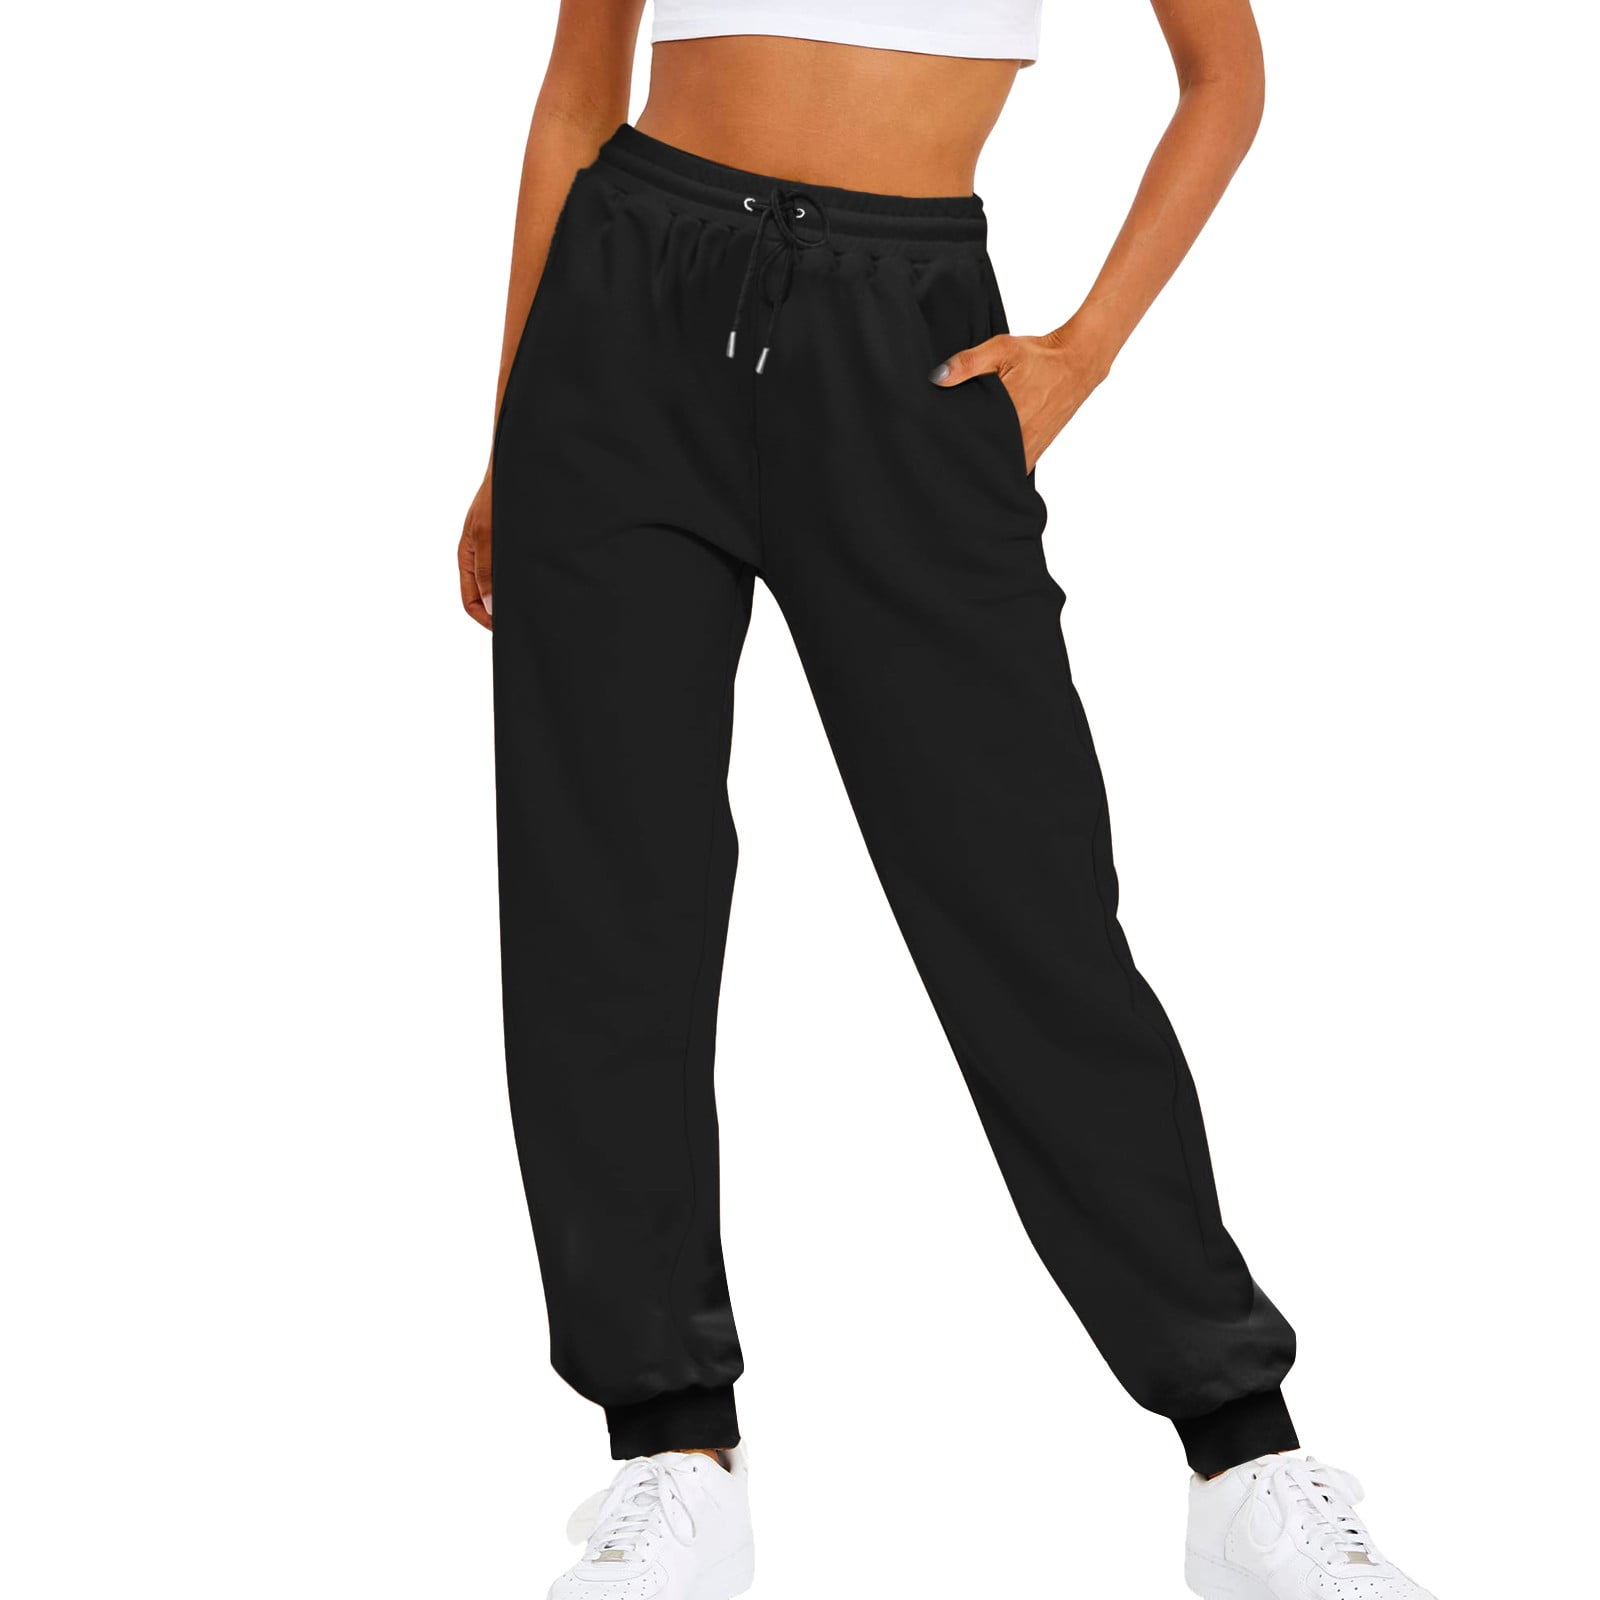 Dndkilg Women's Workout Pro Club Joggers with Pockets Casual Baggy